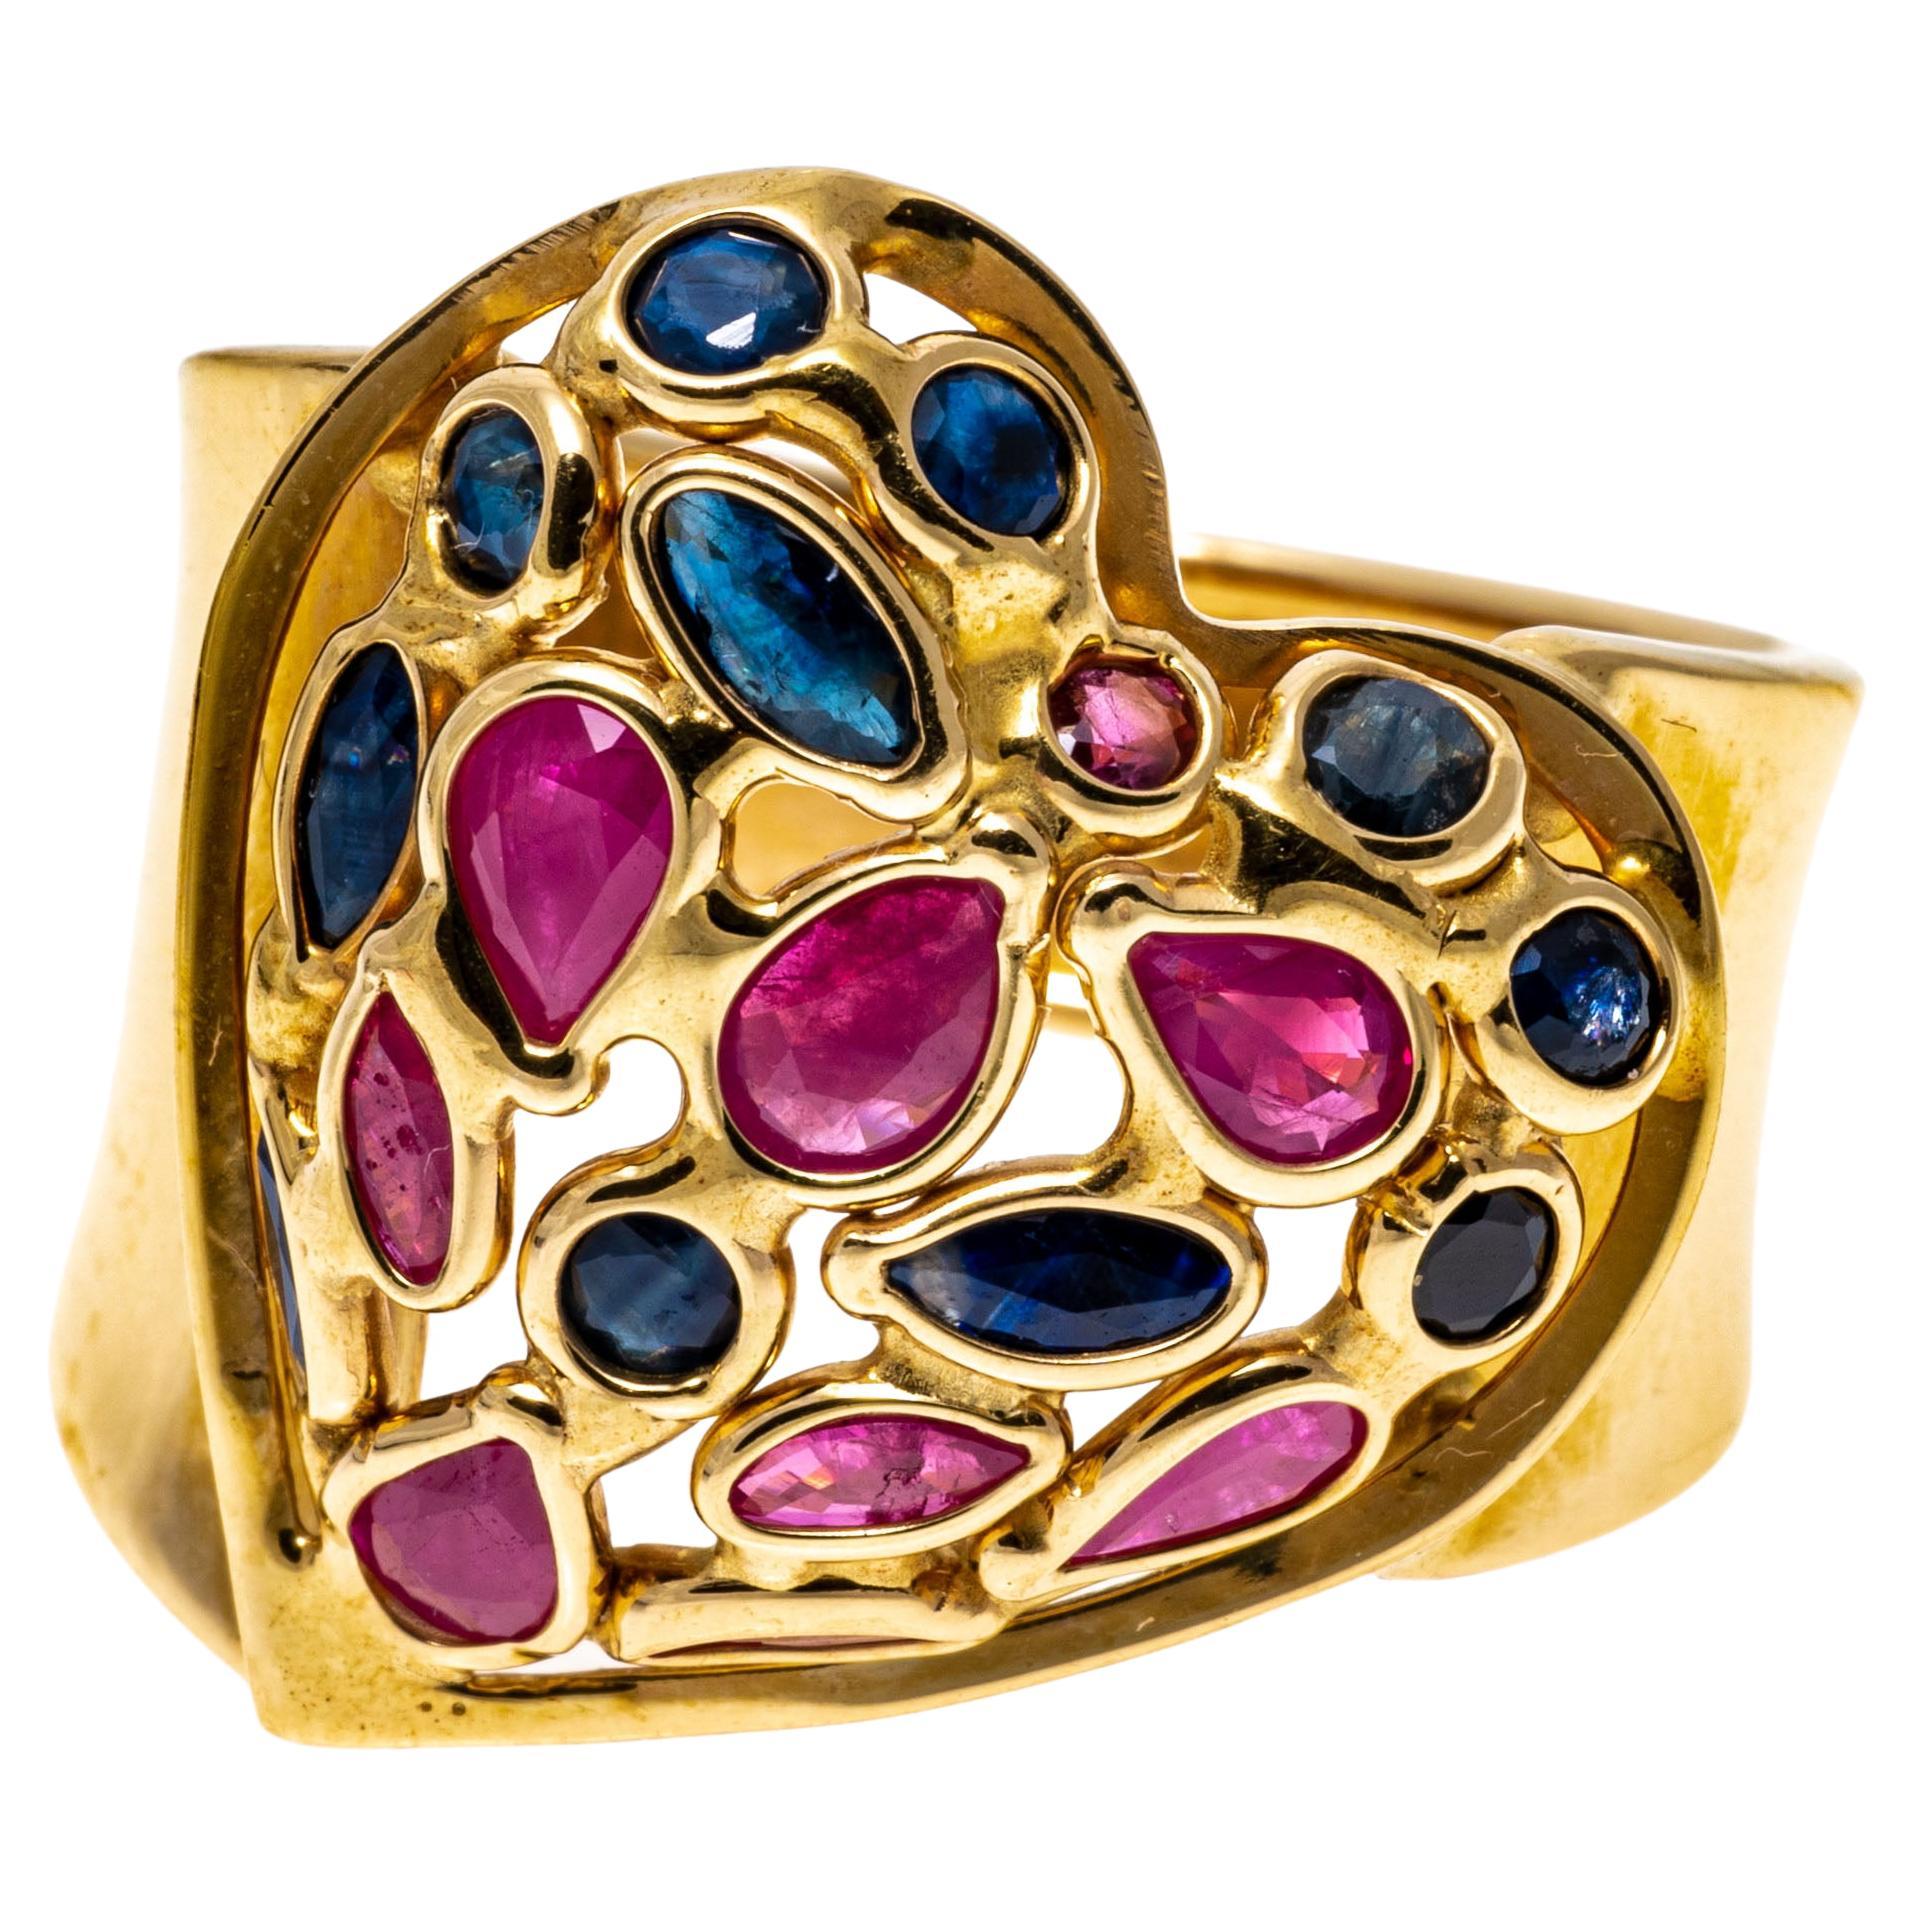 14k Wide Stained Glass Heart Motif Ring Set with Rubies and Sapphires For Sale